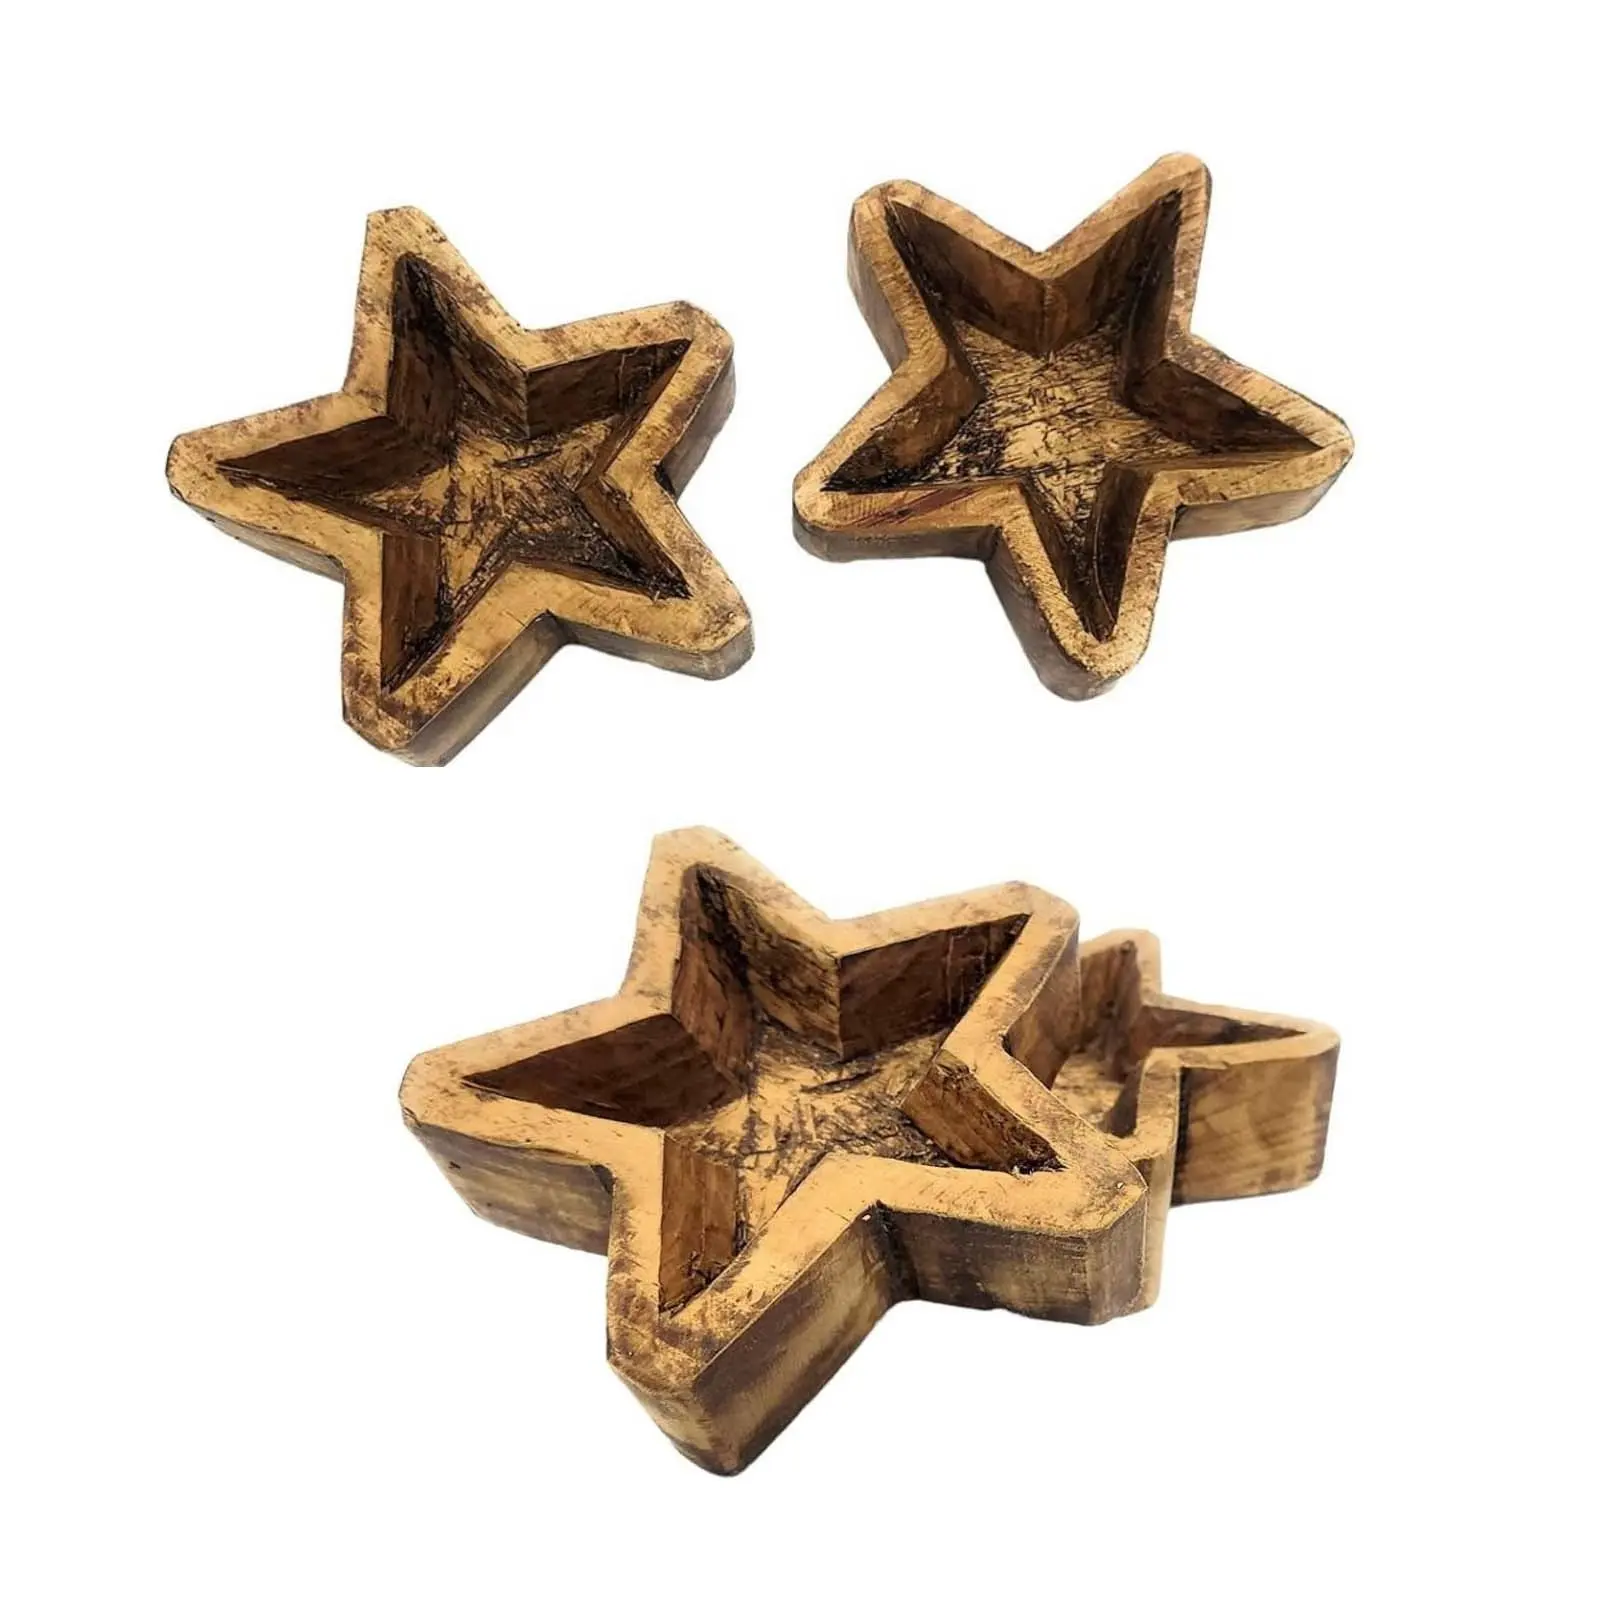 High quality Vintage Natural Wooden Dough Bowl Star Shaped Used for Home Decoration and Candle Making Handmade Custom Design